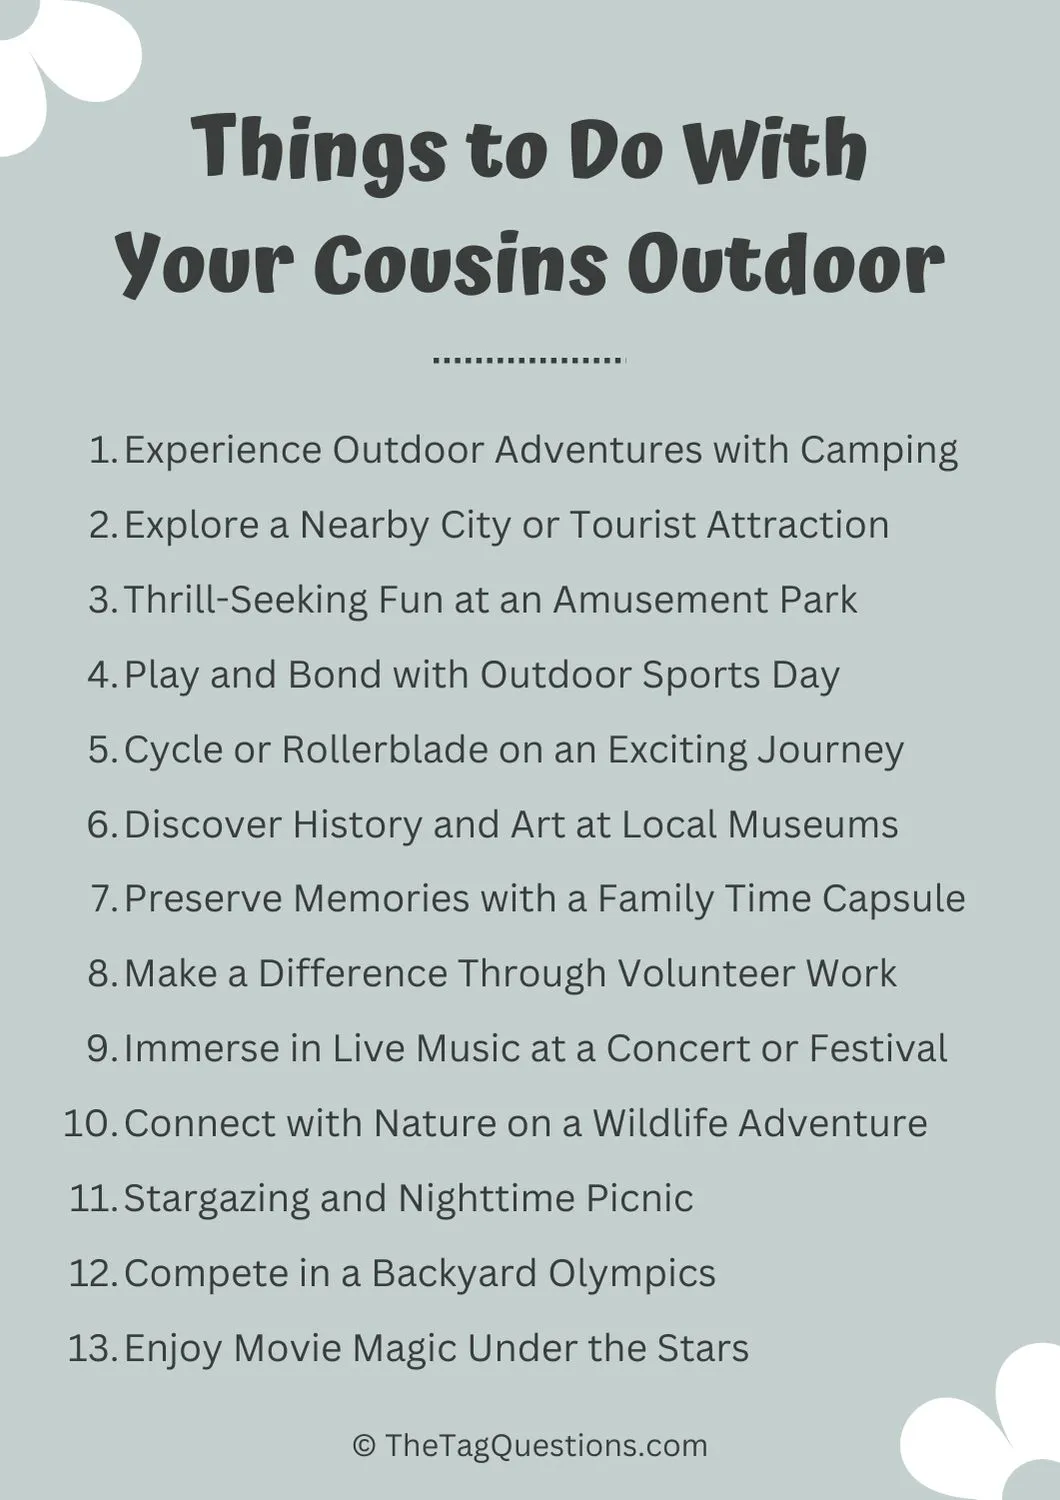 Things to Do With Your Cousins Outdoor